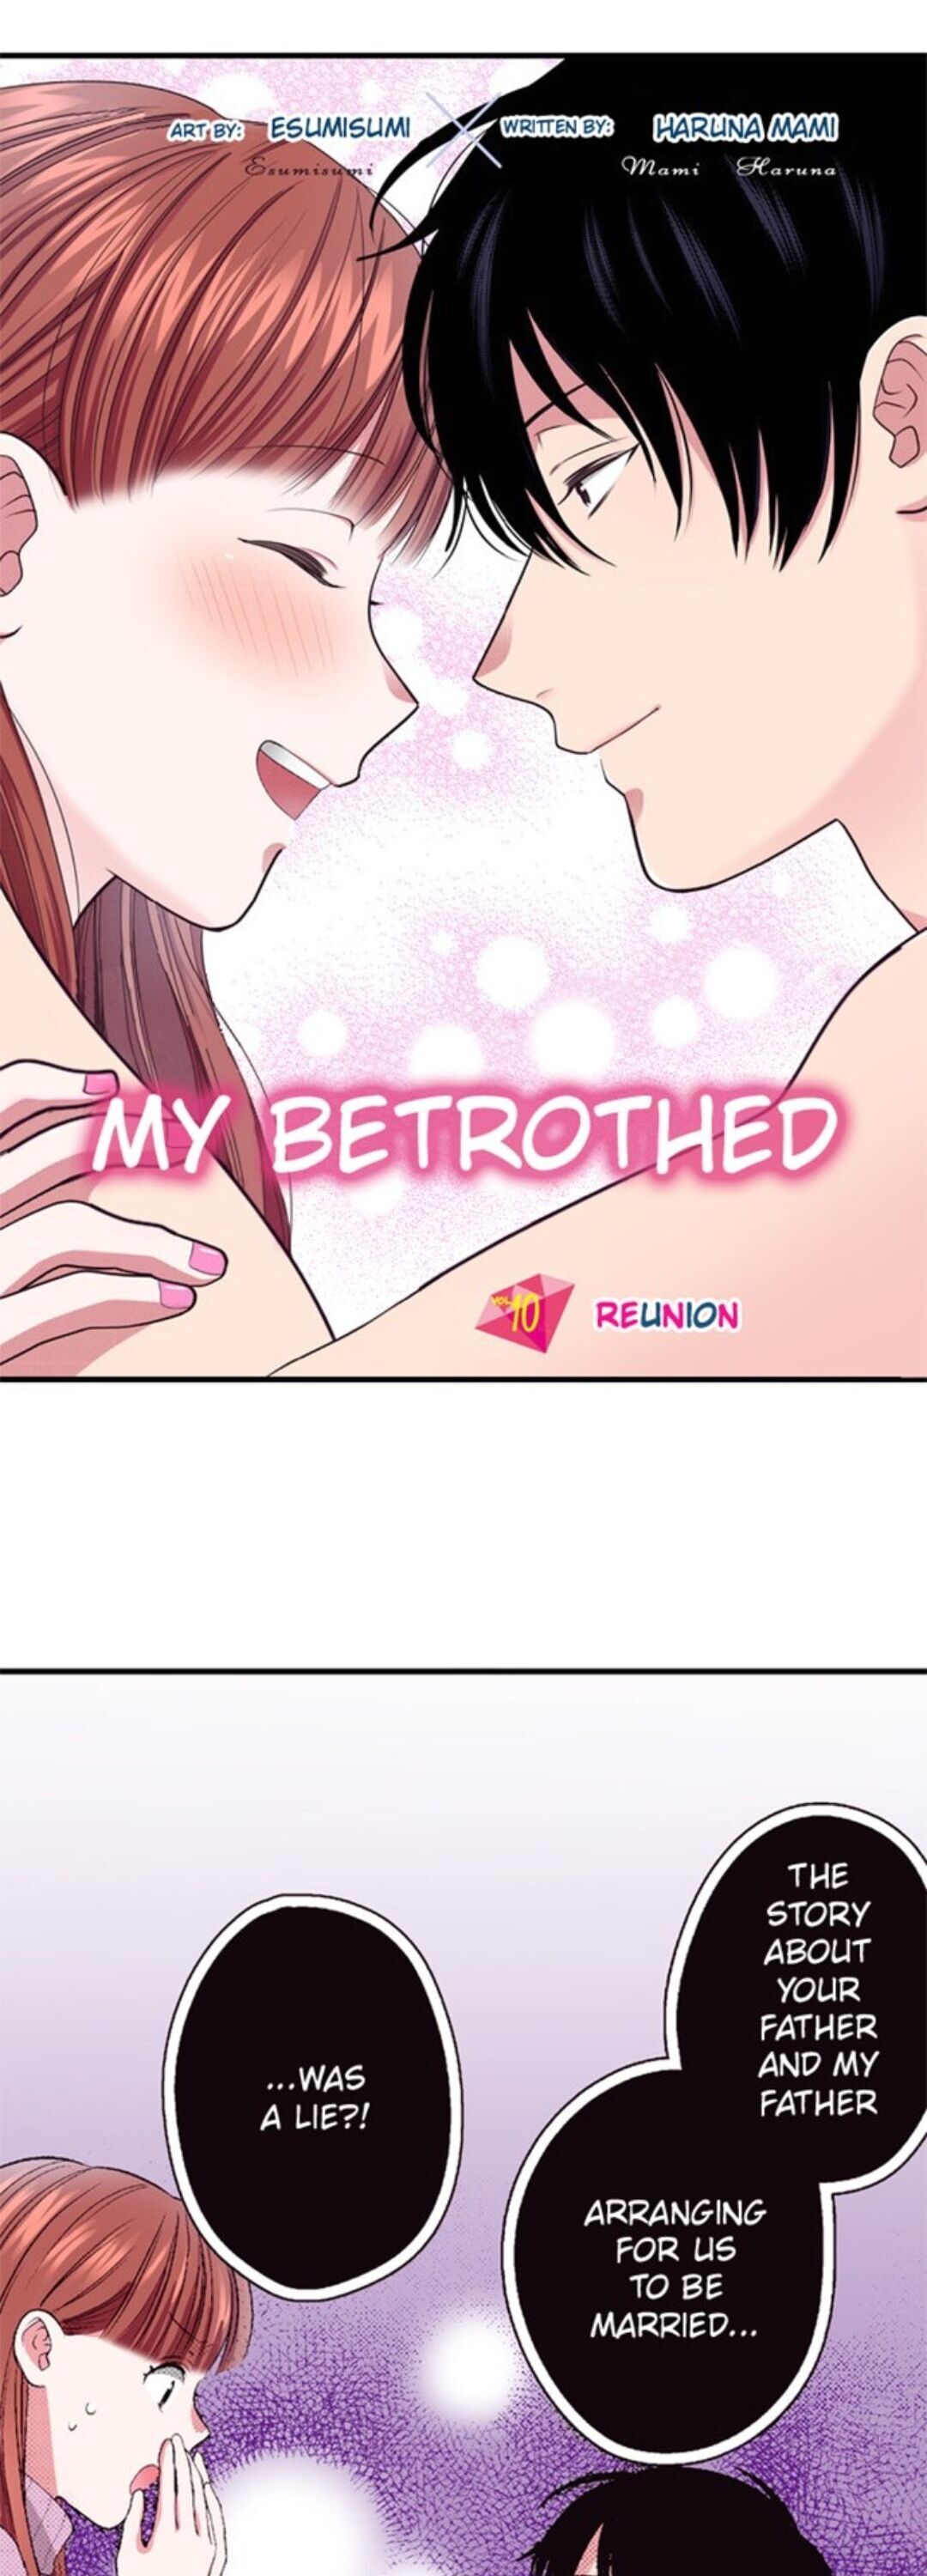 My Betrothed - Page 1